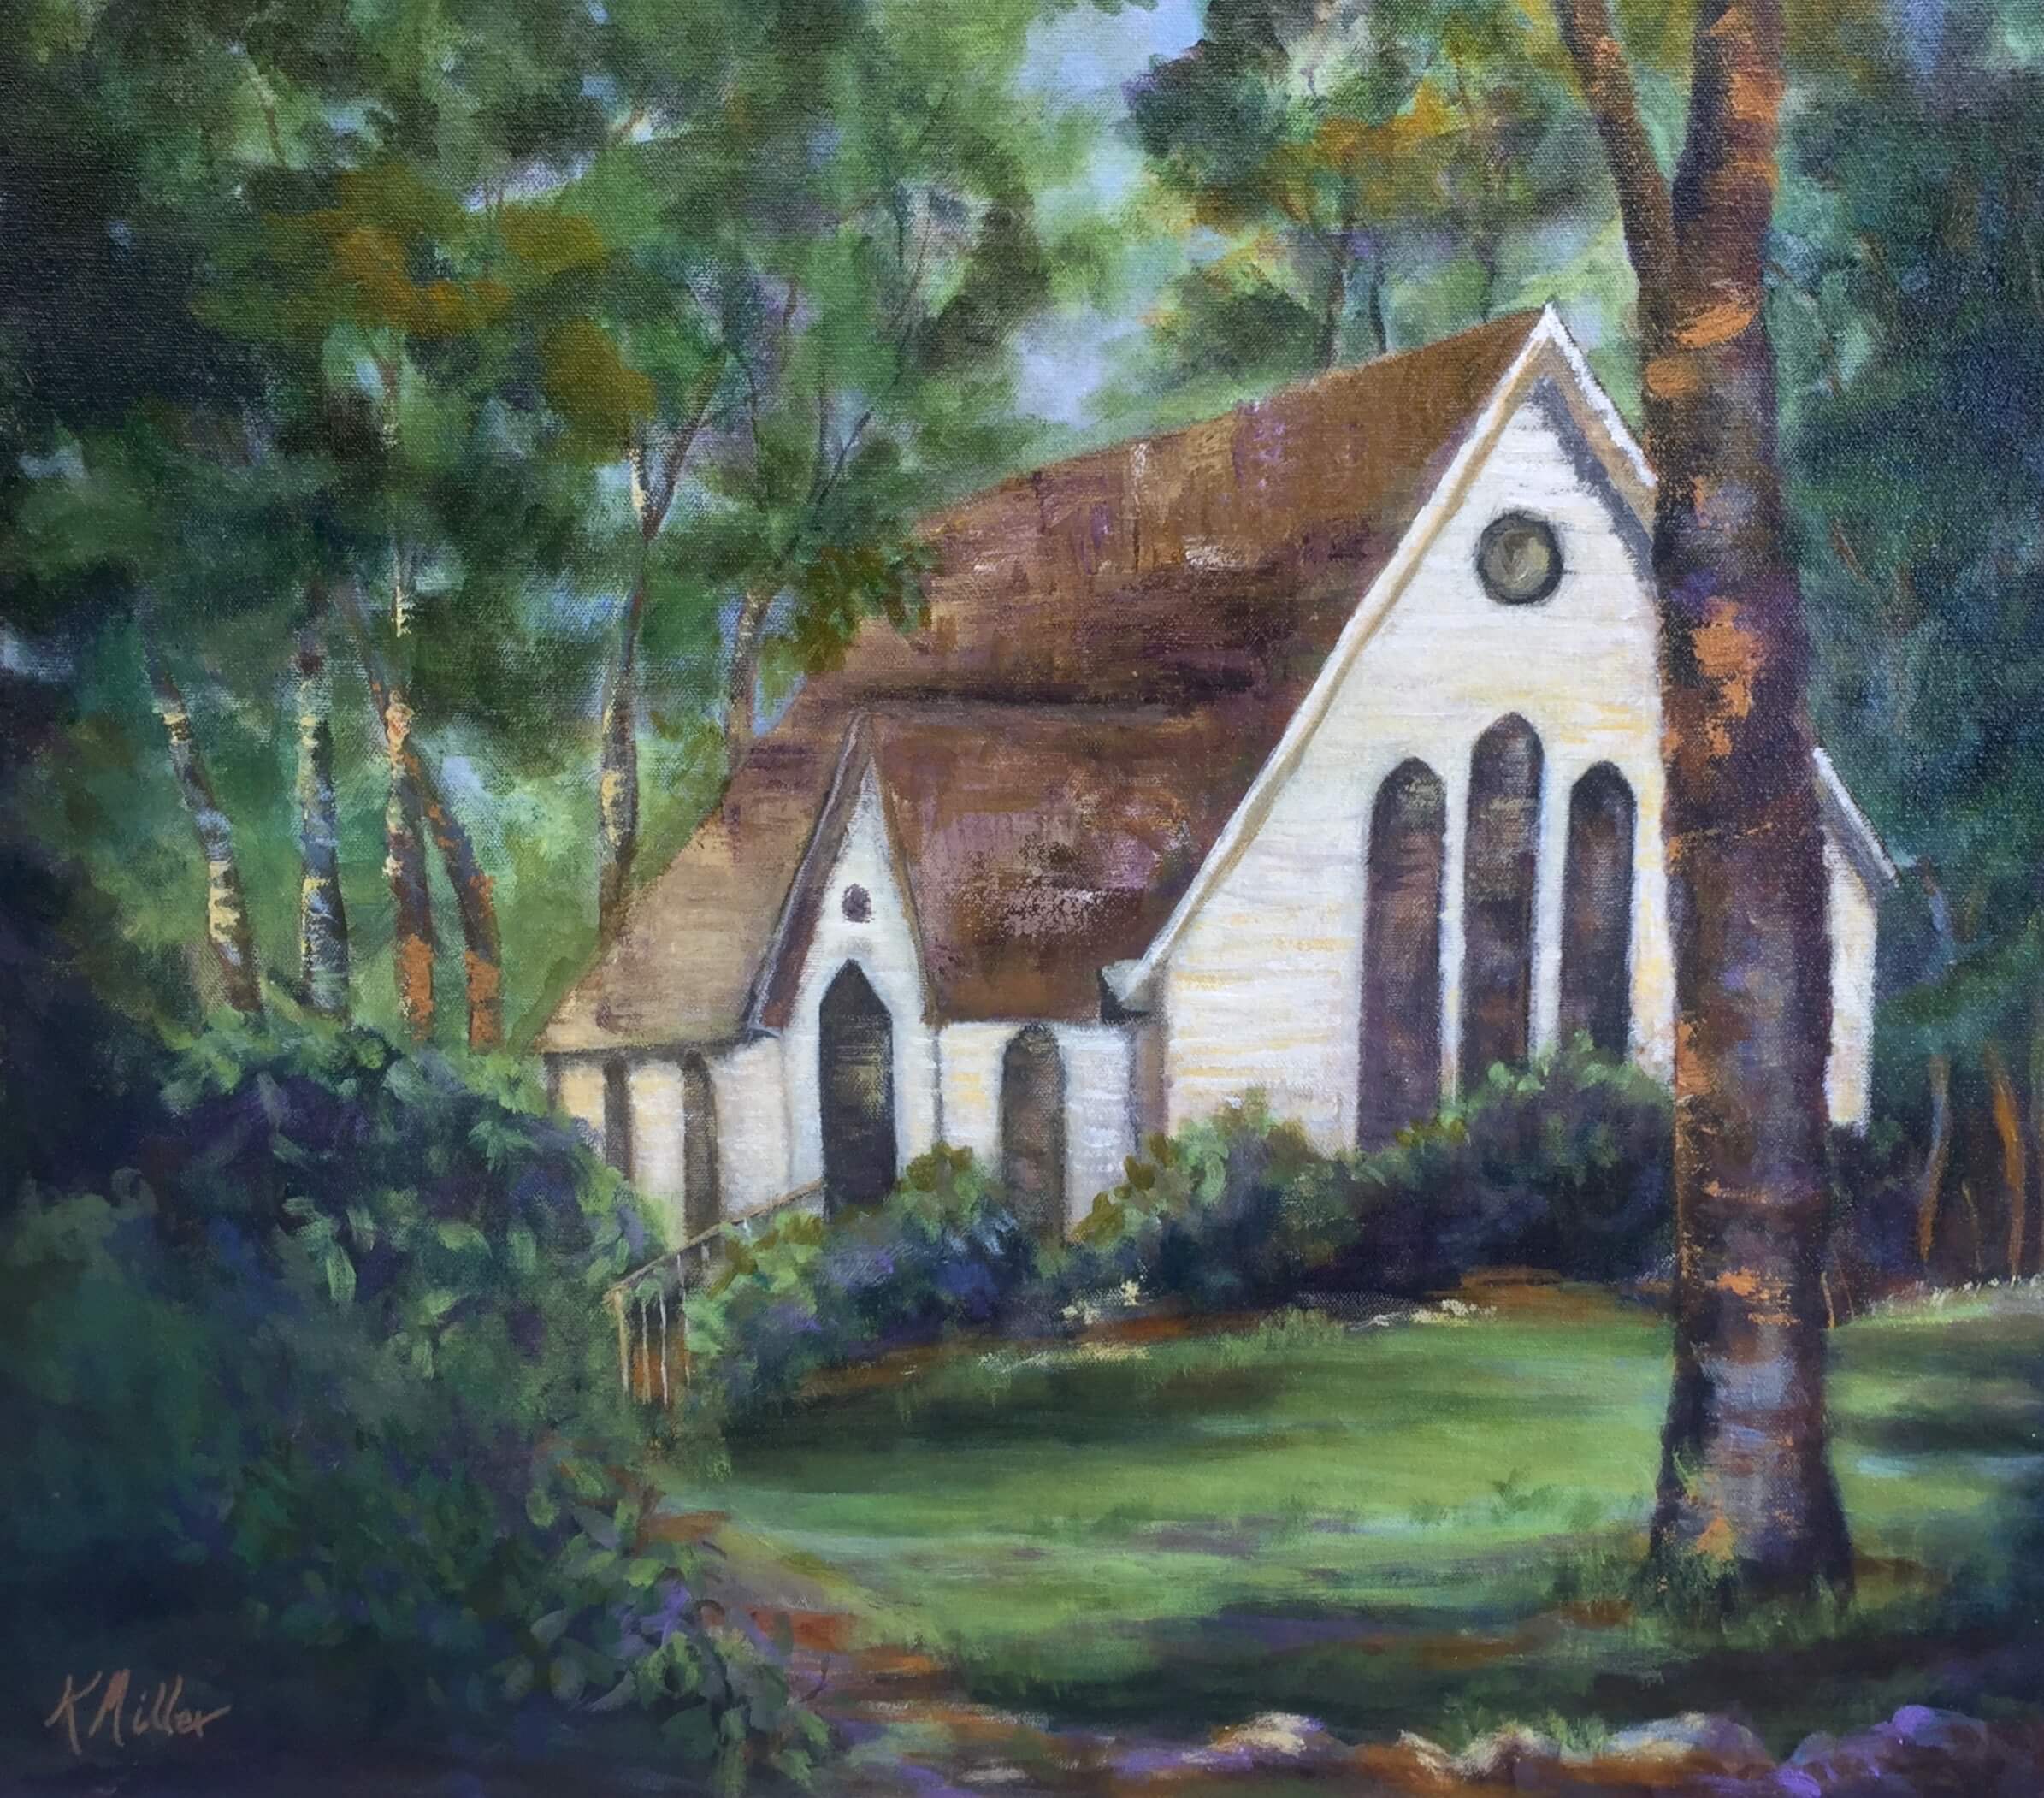 Church Of The Good Shephard 20" x 24" Acrylic on Canvas Original Painting by Kathy Miller